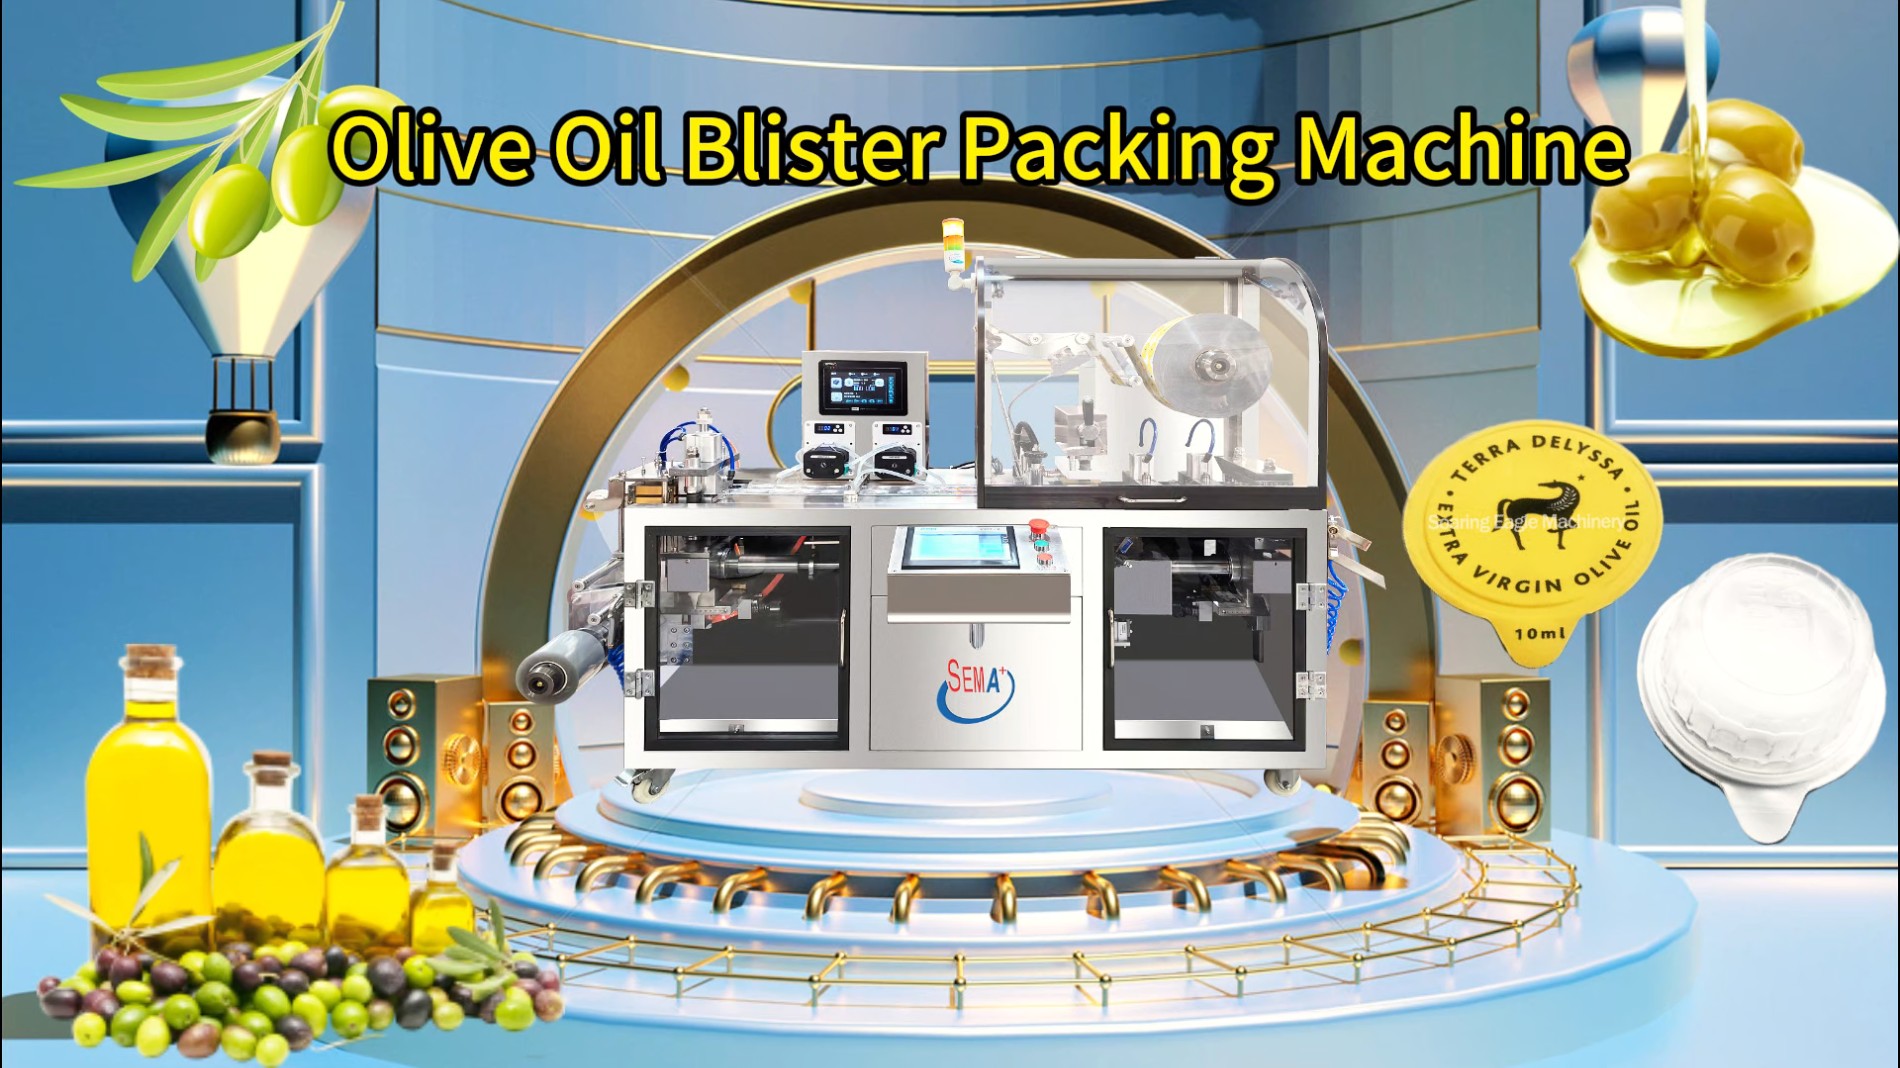 Olive oil blister packing machine